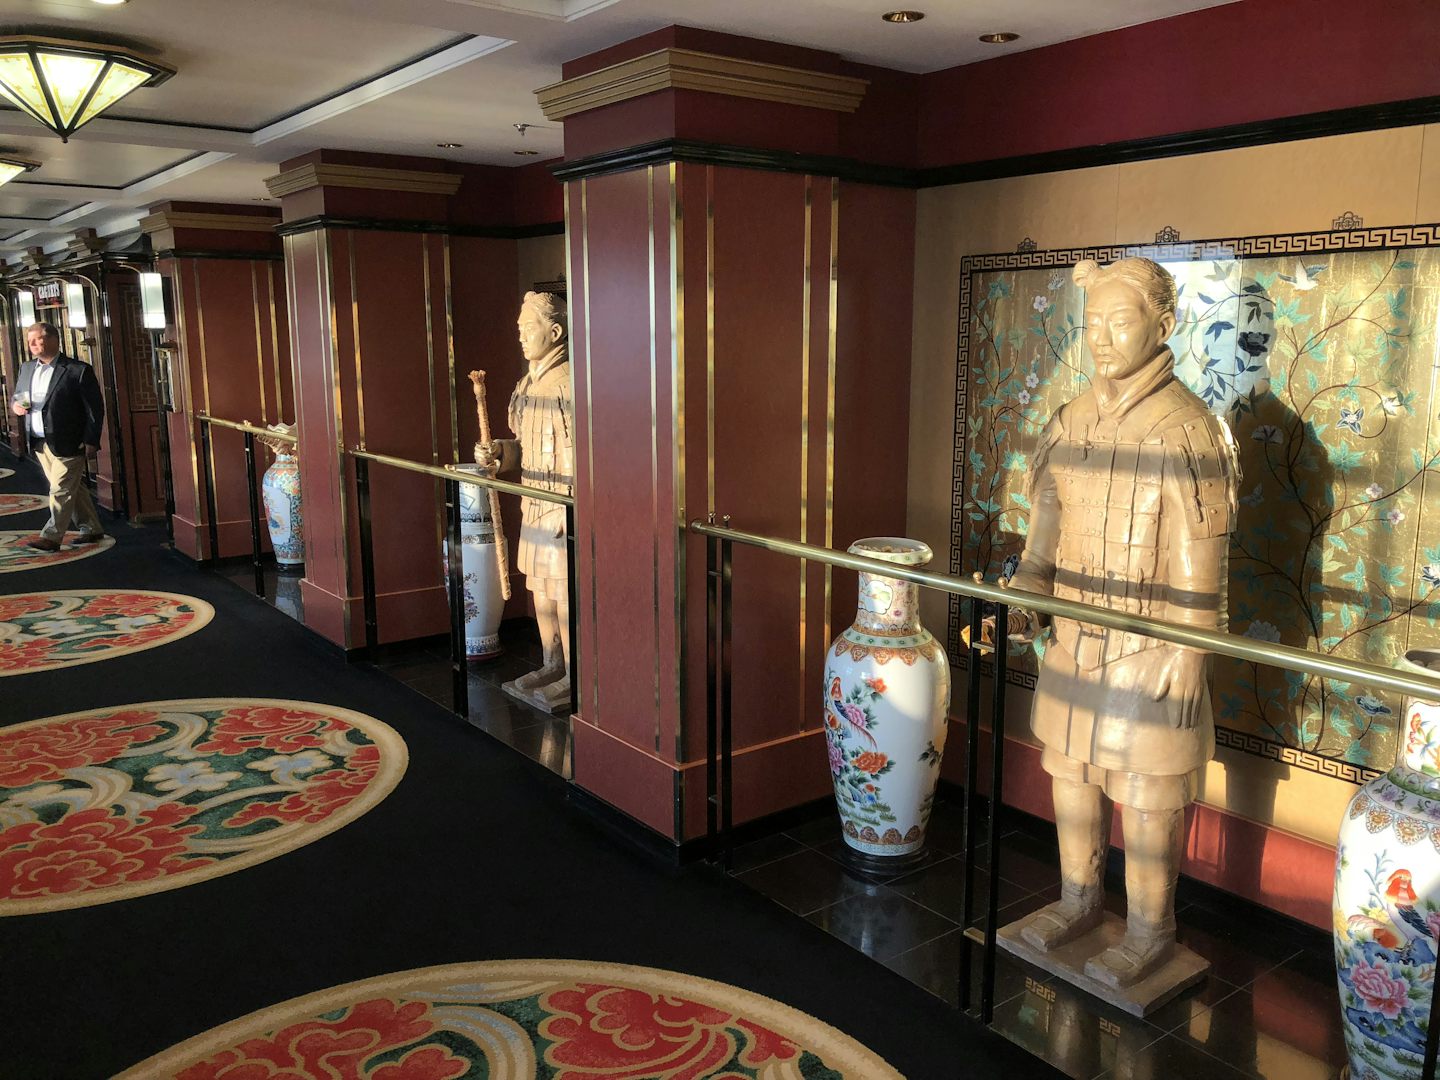 Old but well-kept statues from Star Cruises era.